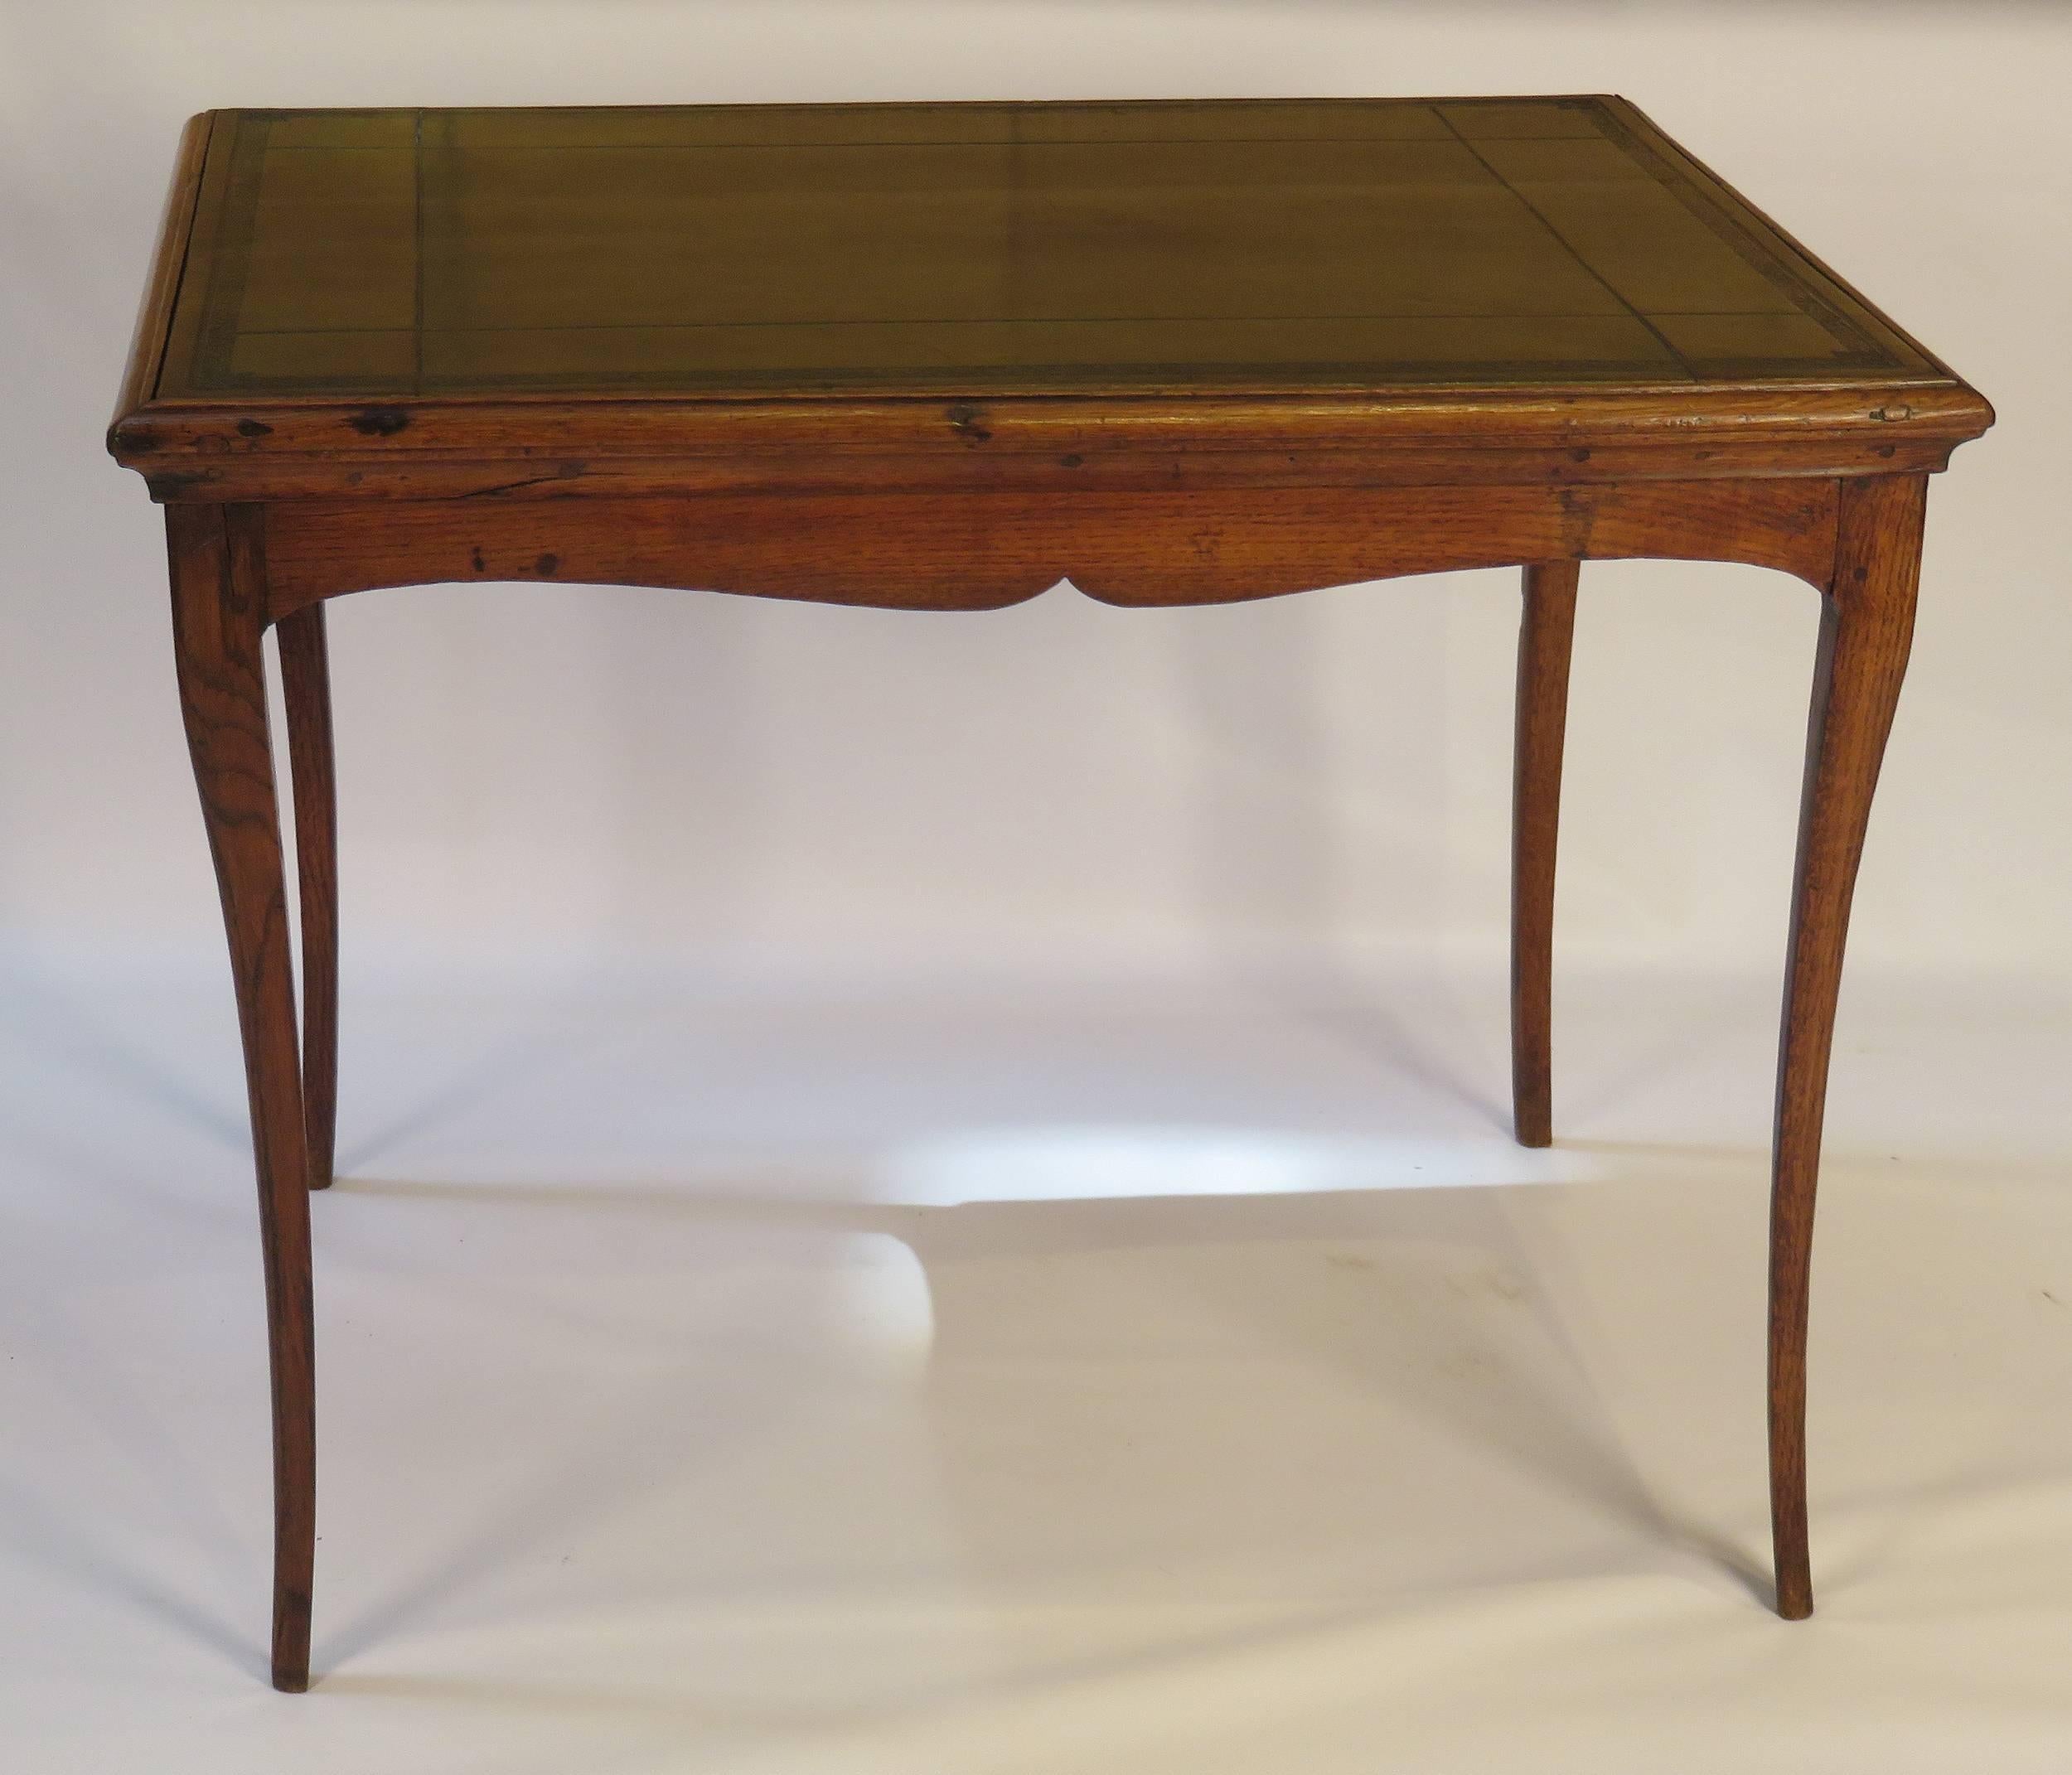 This piece came to us from a good old client. We love the simple lines, good design and usefulness of this table. Originally meant to be used as a desk or game table. Today used the same way or possibly as a side table. Made in France, circa 1780 in